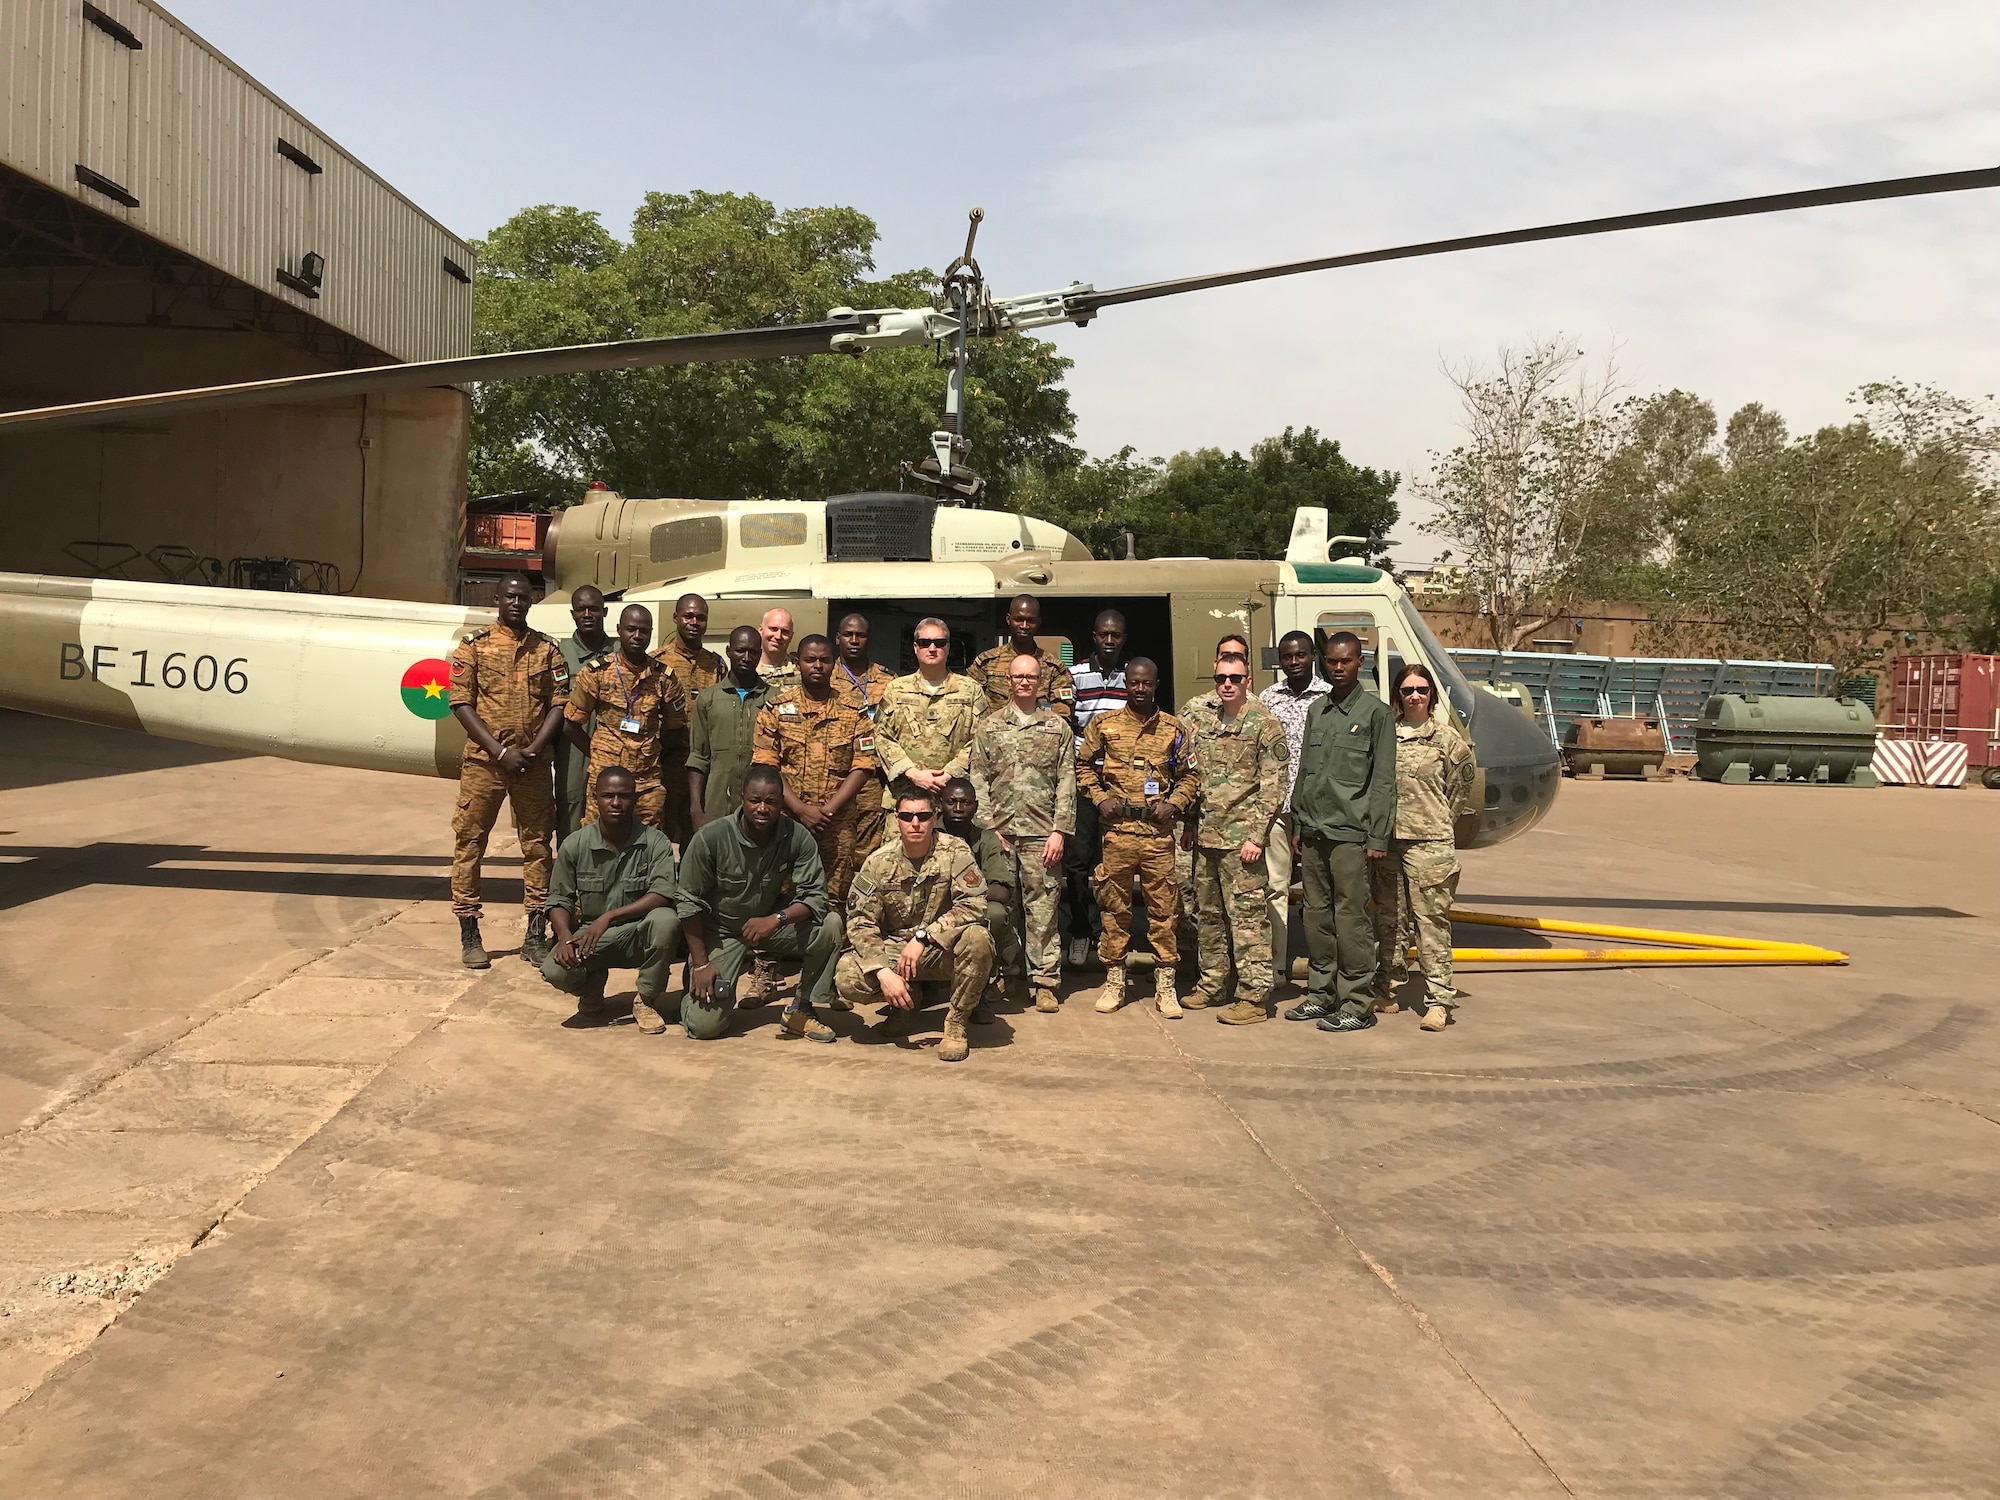 Members from the 818th Mobility Support Advisory Squadron pose for a group photo at Airbase 511 in Burkina Faso, Africa, April 18, 2019. The 818th MSAS sent a seven member Rotary Wing Maintenance and Operations mobile training team to identify the cause of a significant maintenance issue that had grounded the Burkina Faso Air Force’s UH-1H helicopter fleet for nearly a year. (U.S. Air Force photo by Master Sgt. Sarah Colwell)